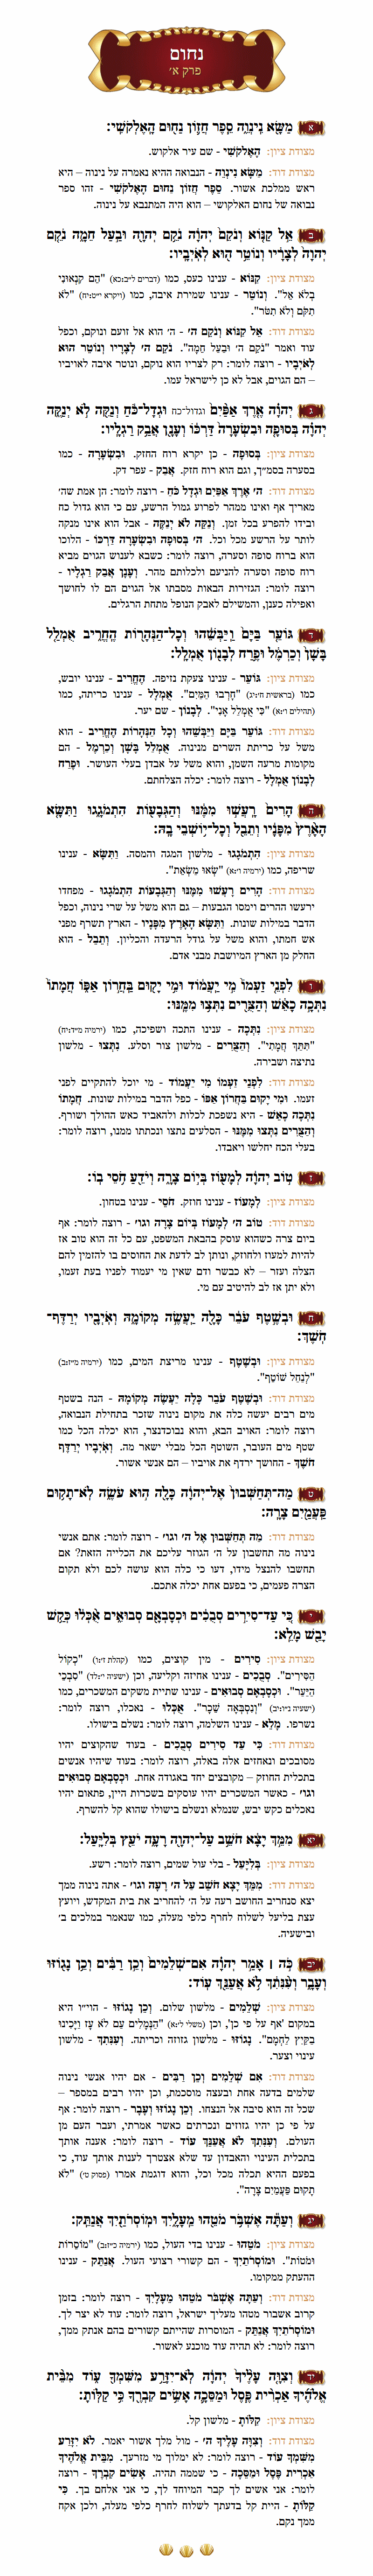 Sefer Nachum Chapter 1 with commentary